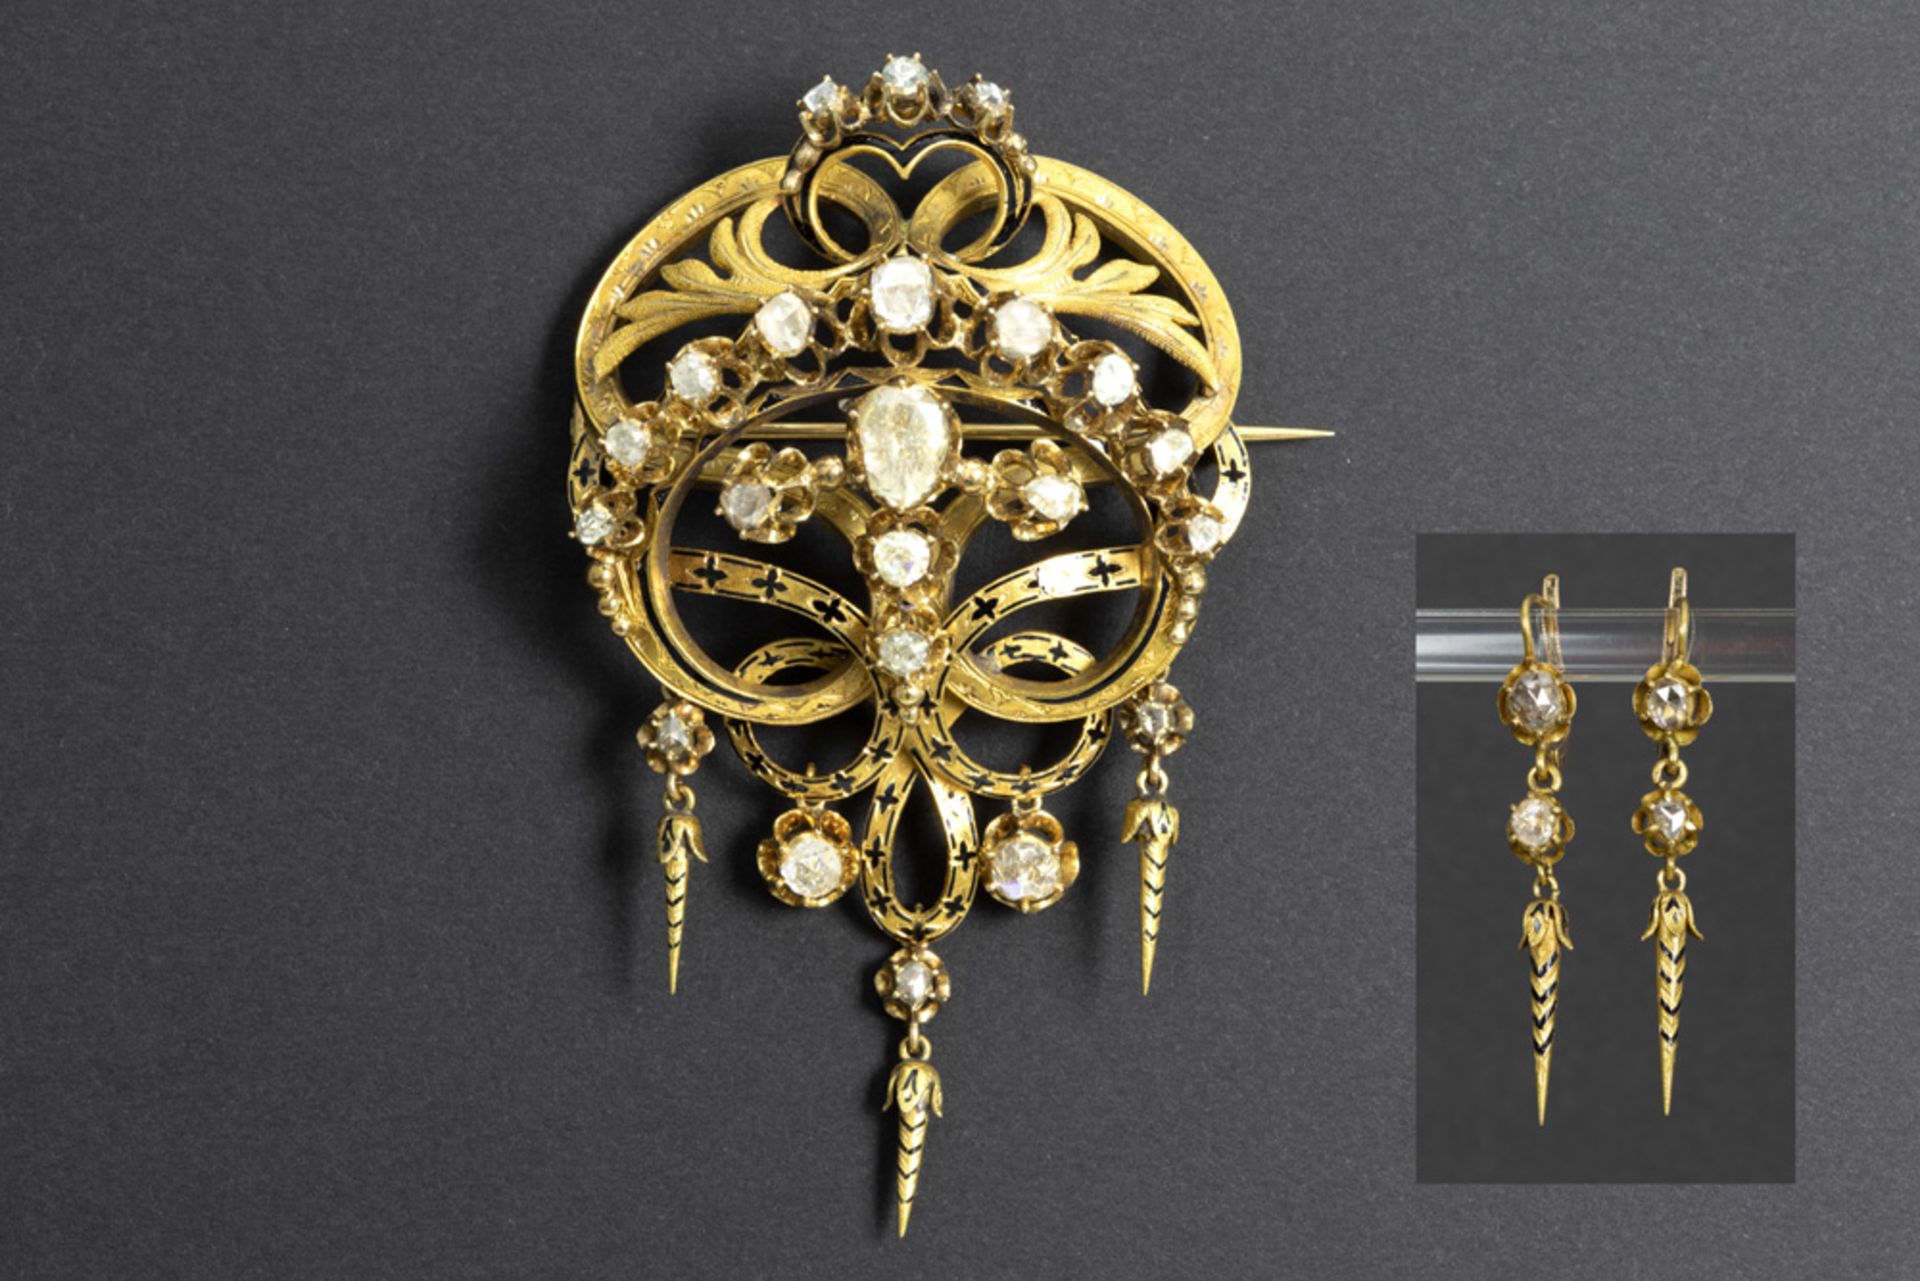 19th Cent. French marked Napoleon III jewelry set in yellow gold (18 carat) with big and smaller